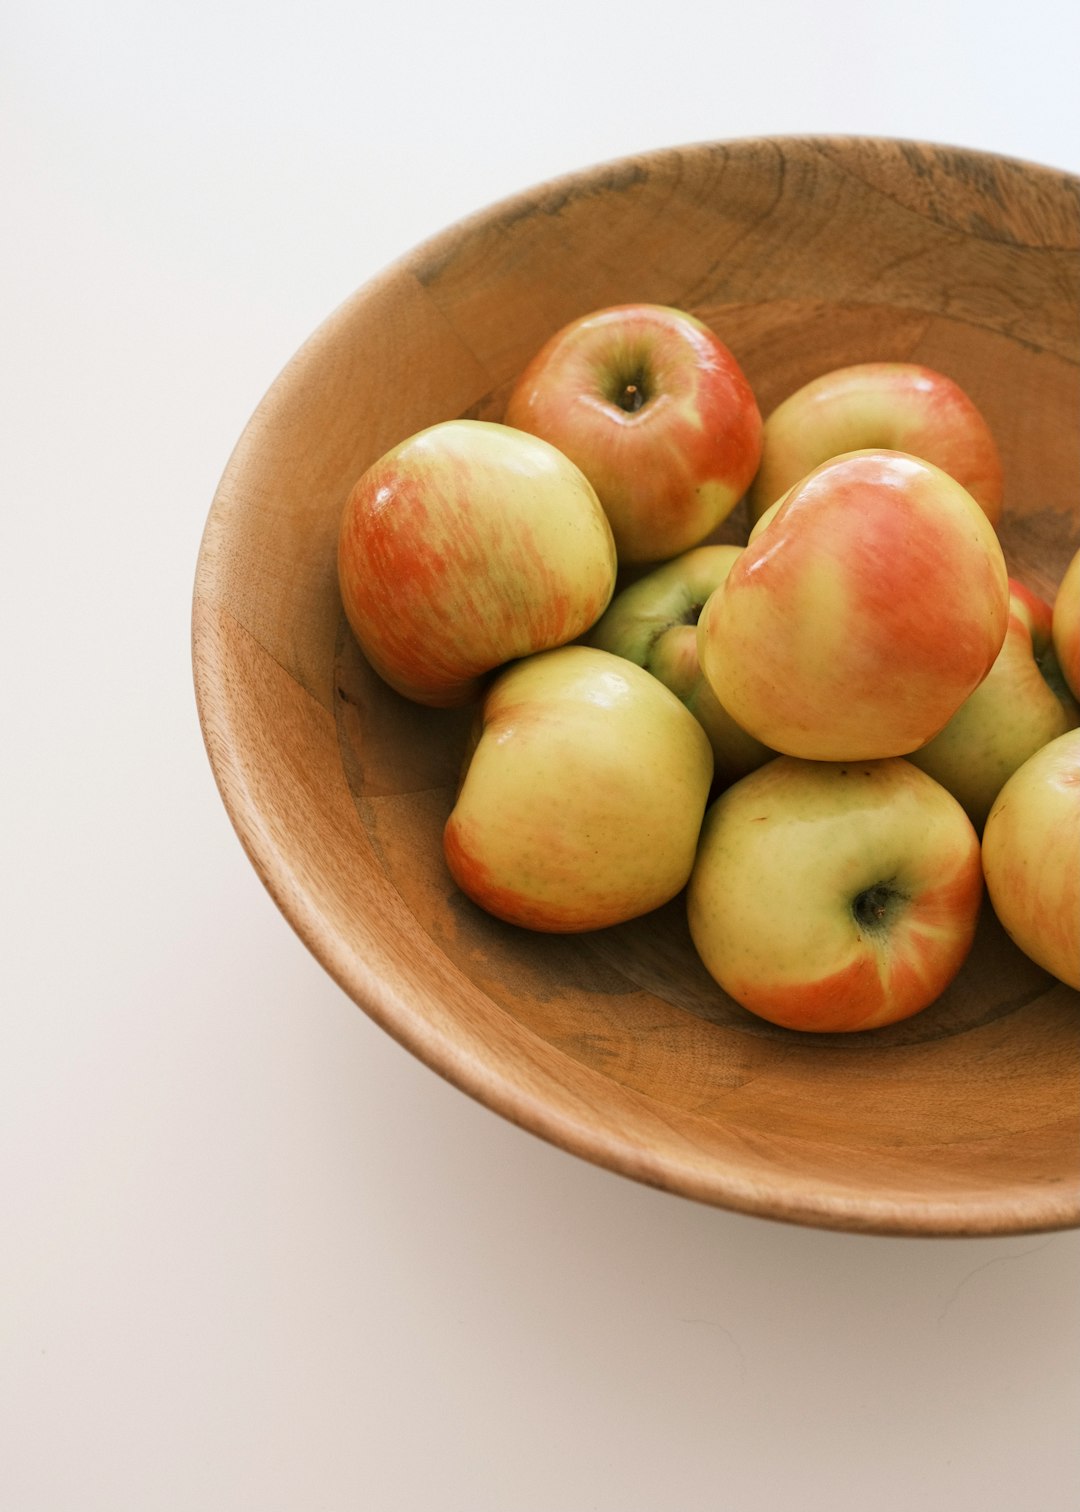 green and red apples on brown wooden bowl